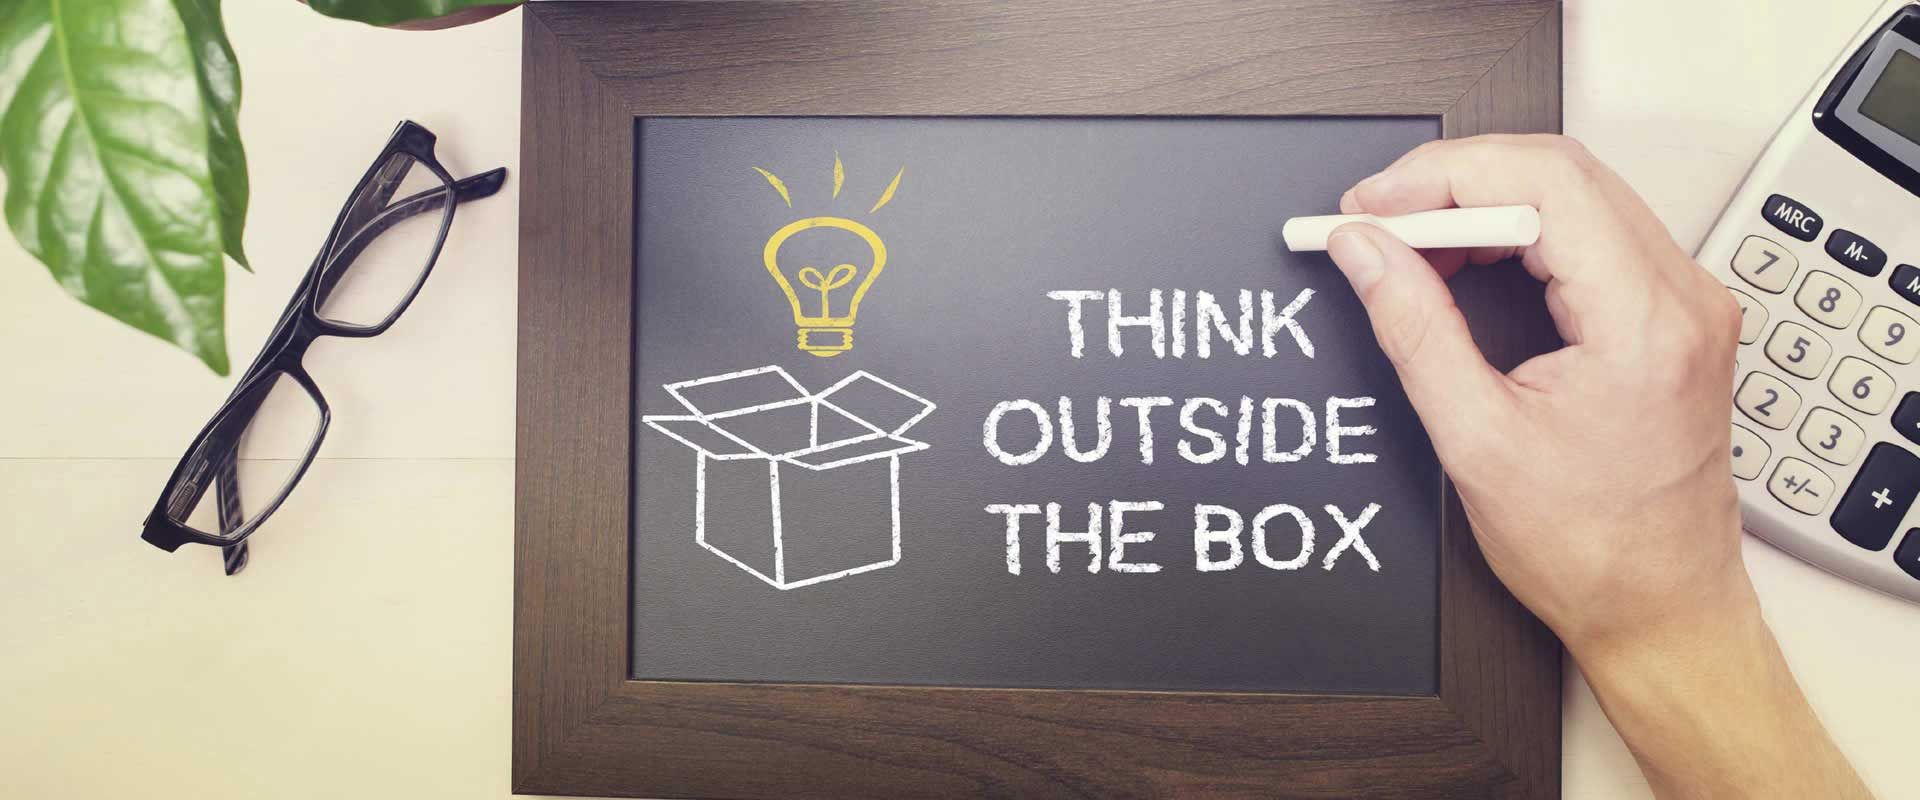 THINKING OUT OF THE BOX… Is it that easy?